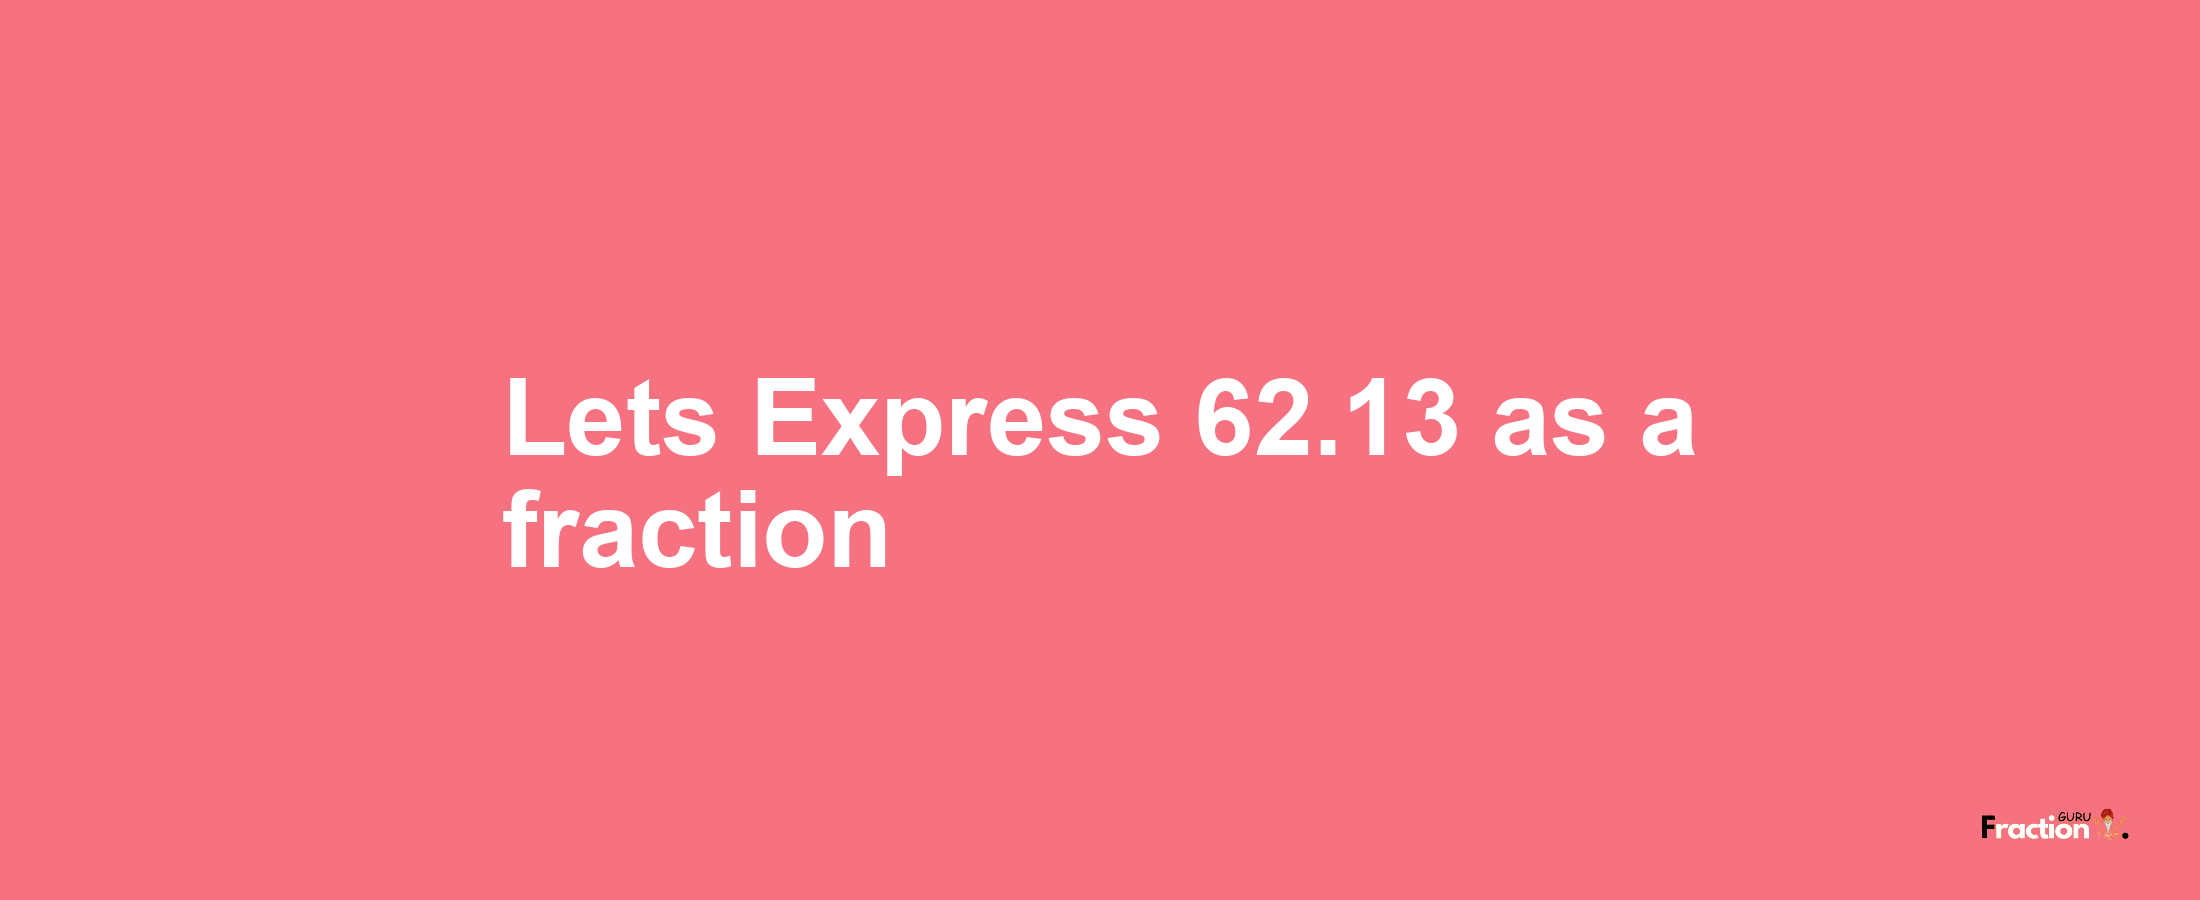 Lets Express 62.13 as afraction